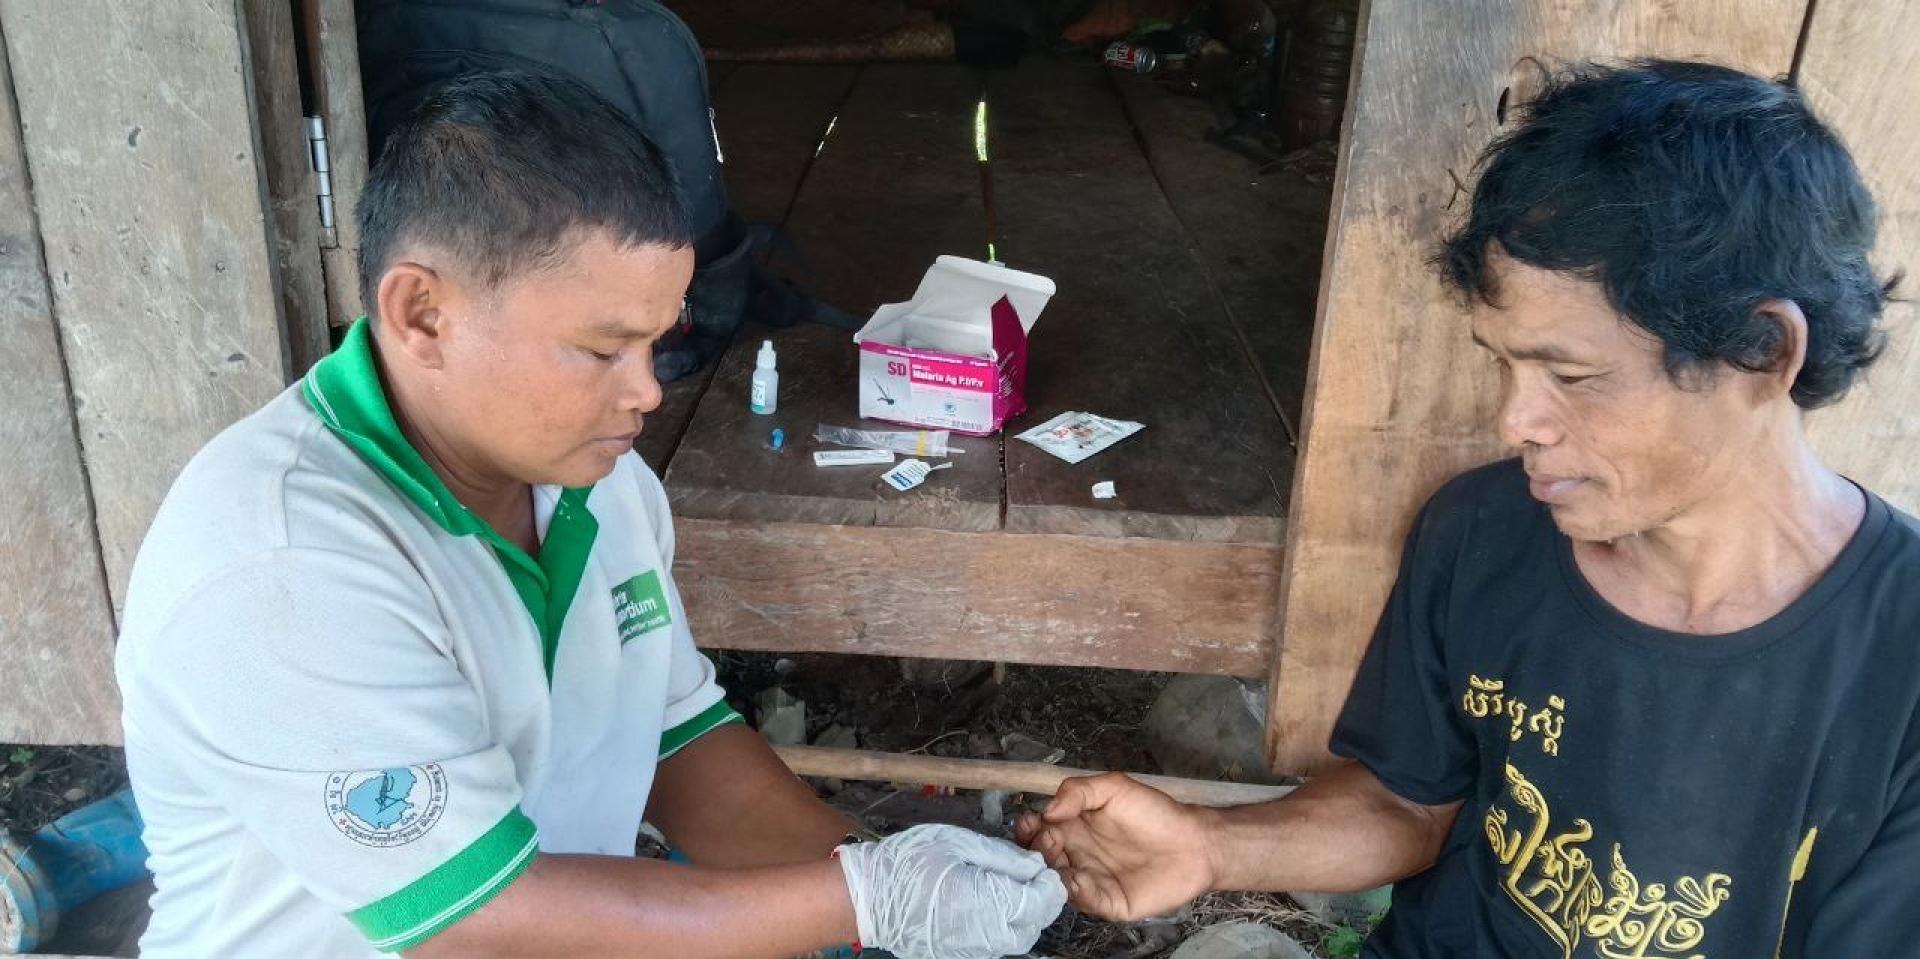 Mobile malaria worker, San, draws a blood sample from a forest-goer to perform a malaria rapid diagnostic test in O’Kasing village, Stung Treng province, Cambodia. Photo: Malaria Consortium 